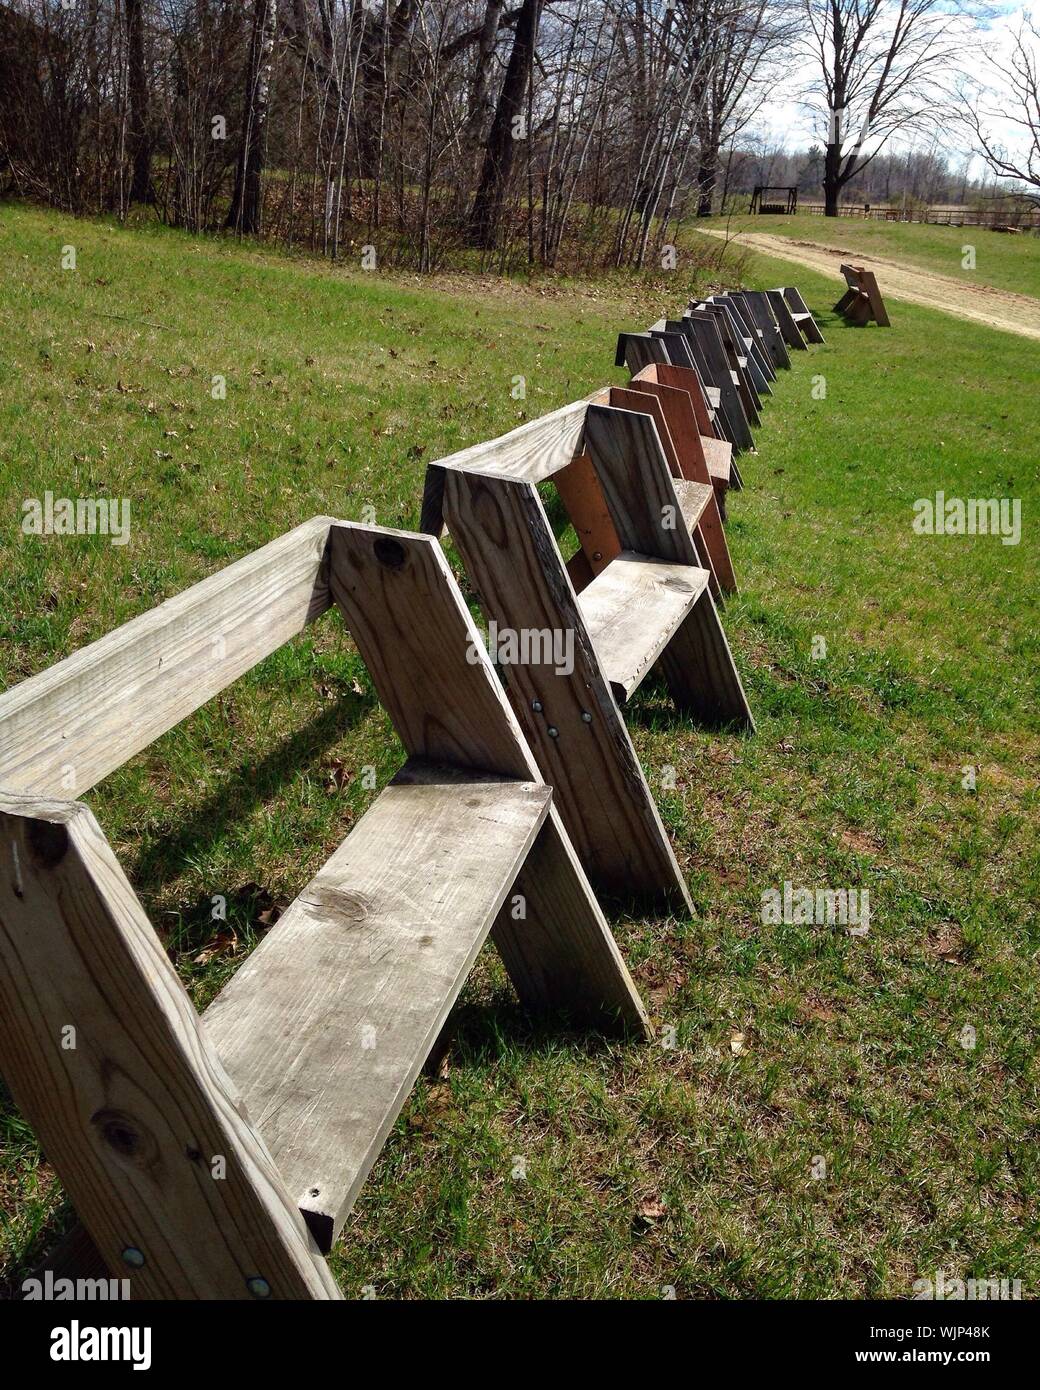 Row Of Wooden Benches On Grassy Field At Parka Stock Photo